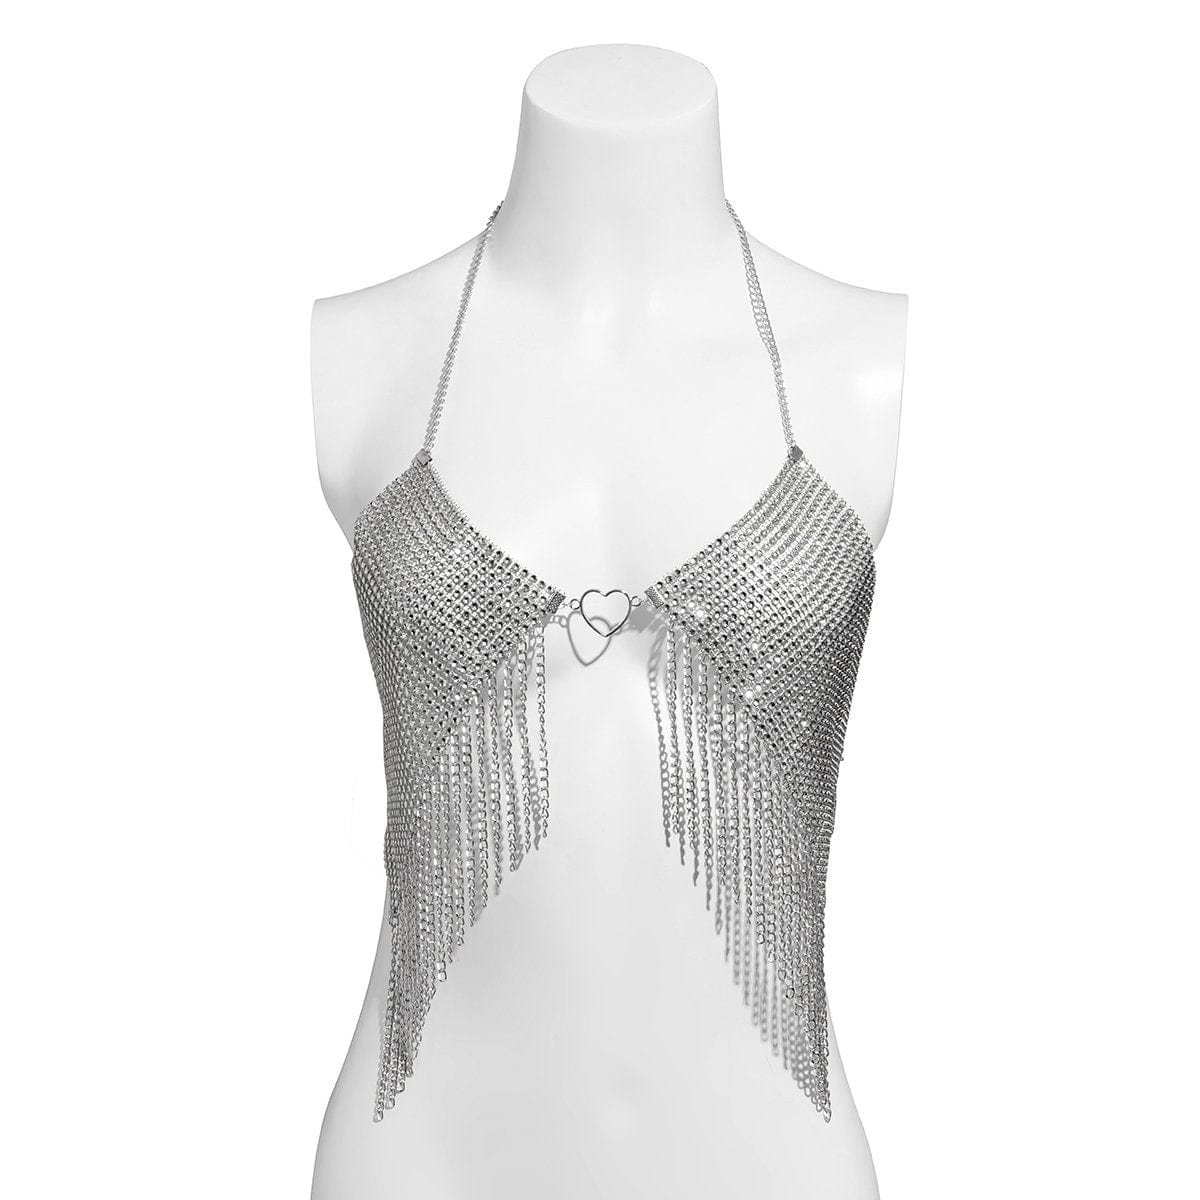 Crystal Mesh Body Chain Bra with Heart Charm and Tassel Detail - 18k Gold Silver Plated - ArtGalleryZen